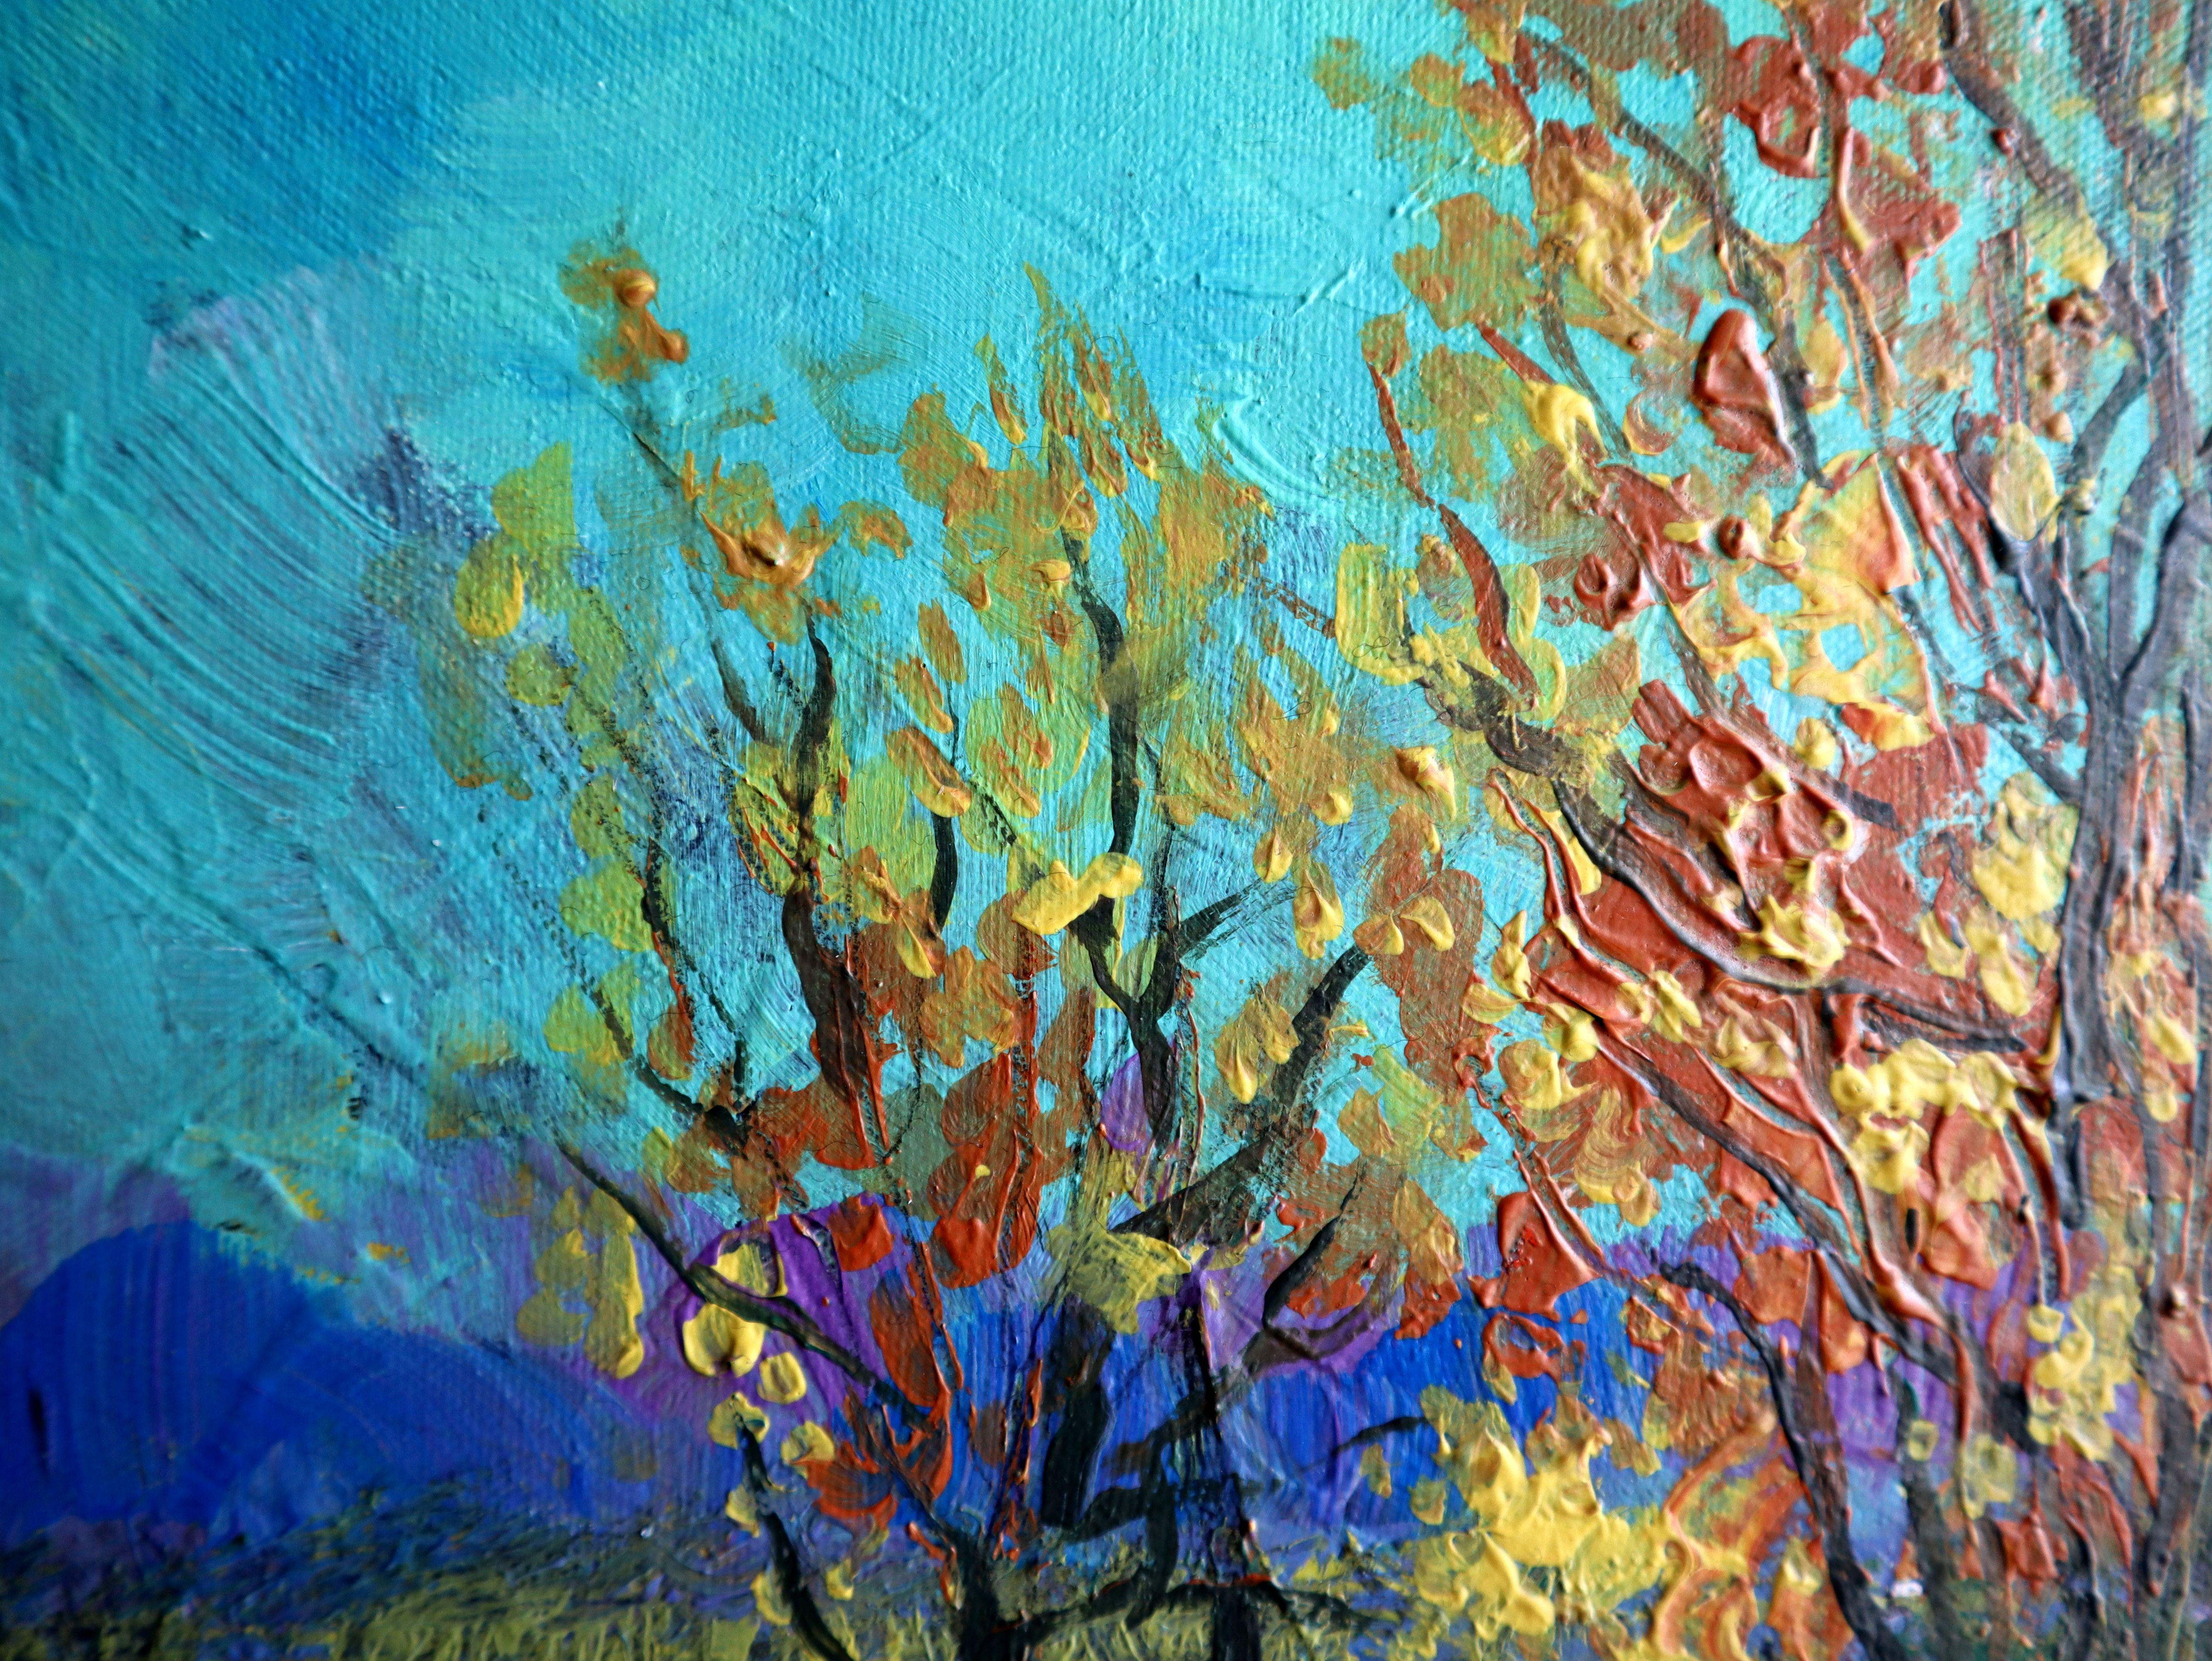 In this passionate swell of colors, where acrylic meets oil, I've translated the essence of a serene glade amidst autumn's embrace. The fervor of expressionism and the soft whisper of impressionism collide, crafting a landscape alive with texture